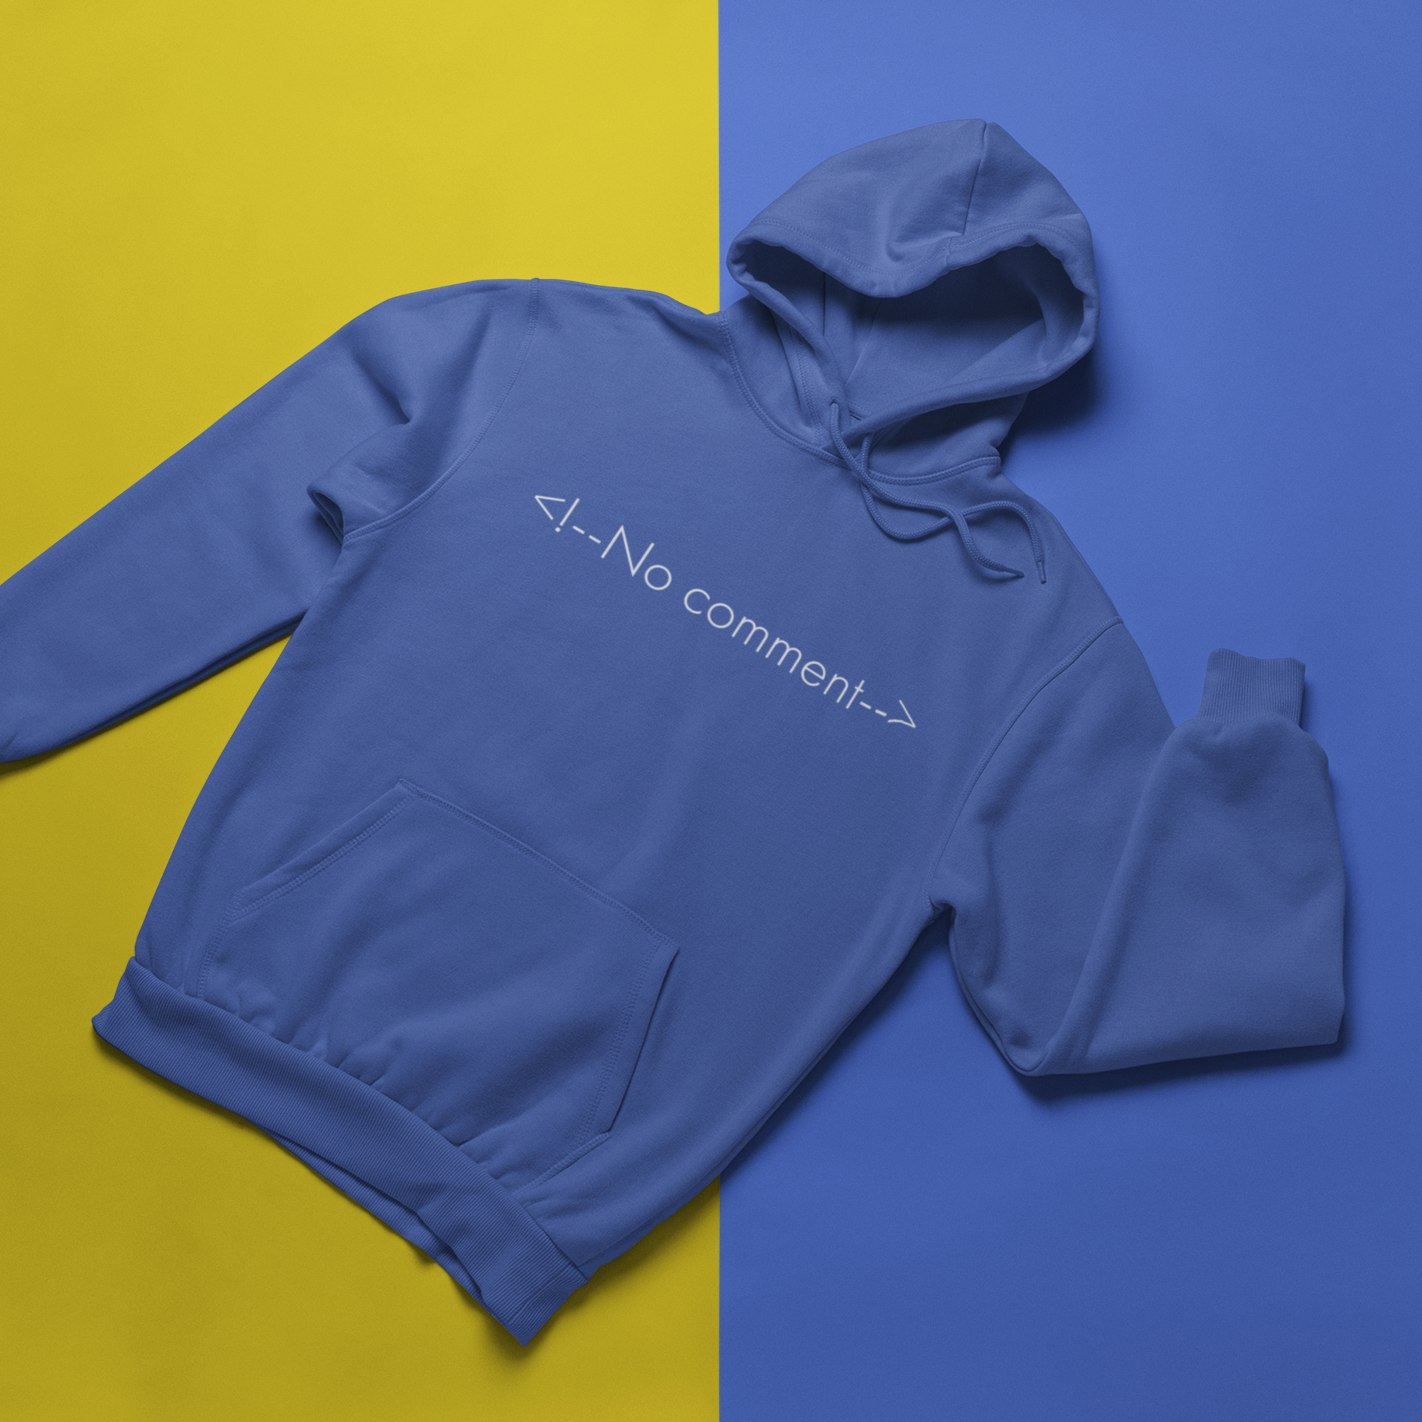 No comment - Heavy Blend™ Hoodie